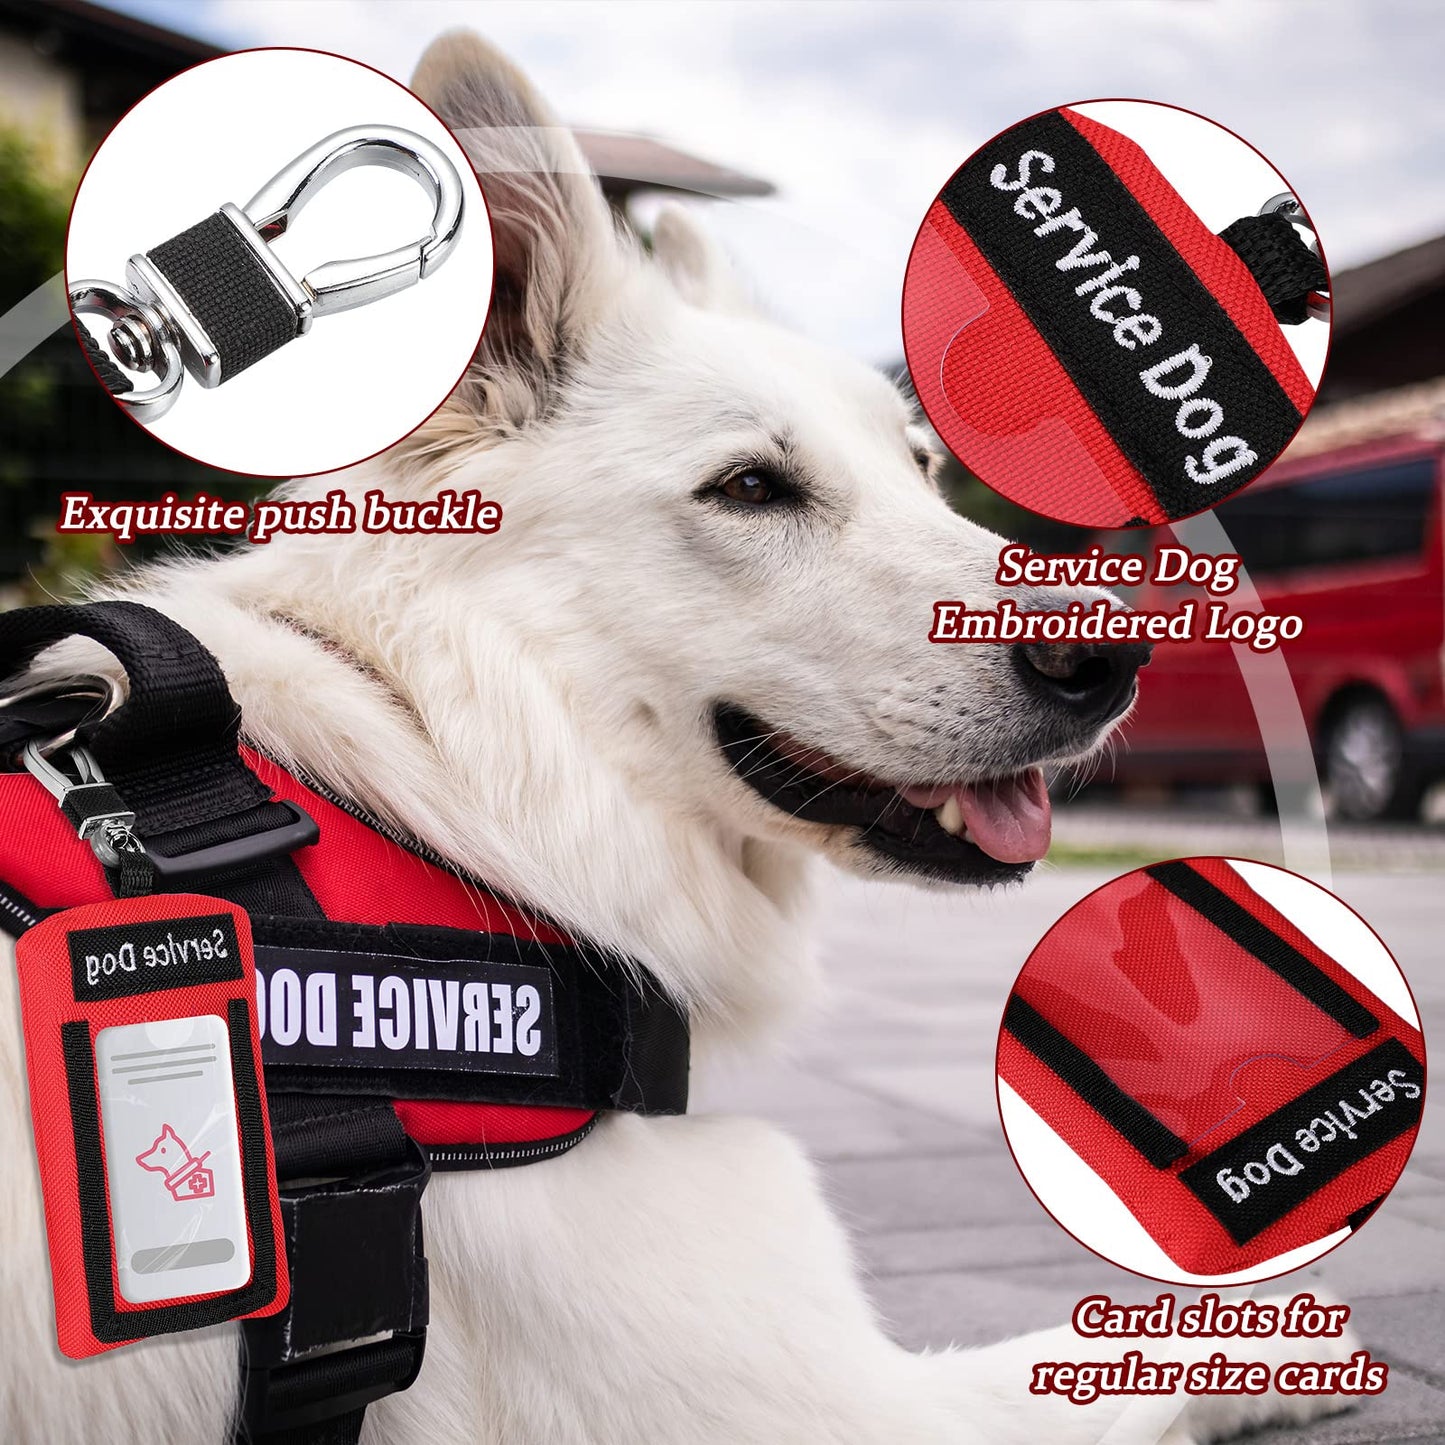 2 Pcs Service Dog ID Identification Carrier Service Dog ID Holder Oxford Cloth Clip on Badge Holder Display Your Dog Zippered Pouch Carry Small Items Clip on Badge Pocket with Card Slot